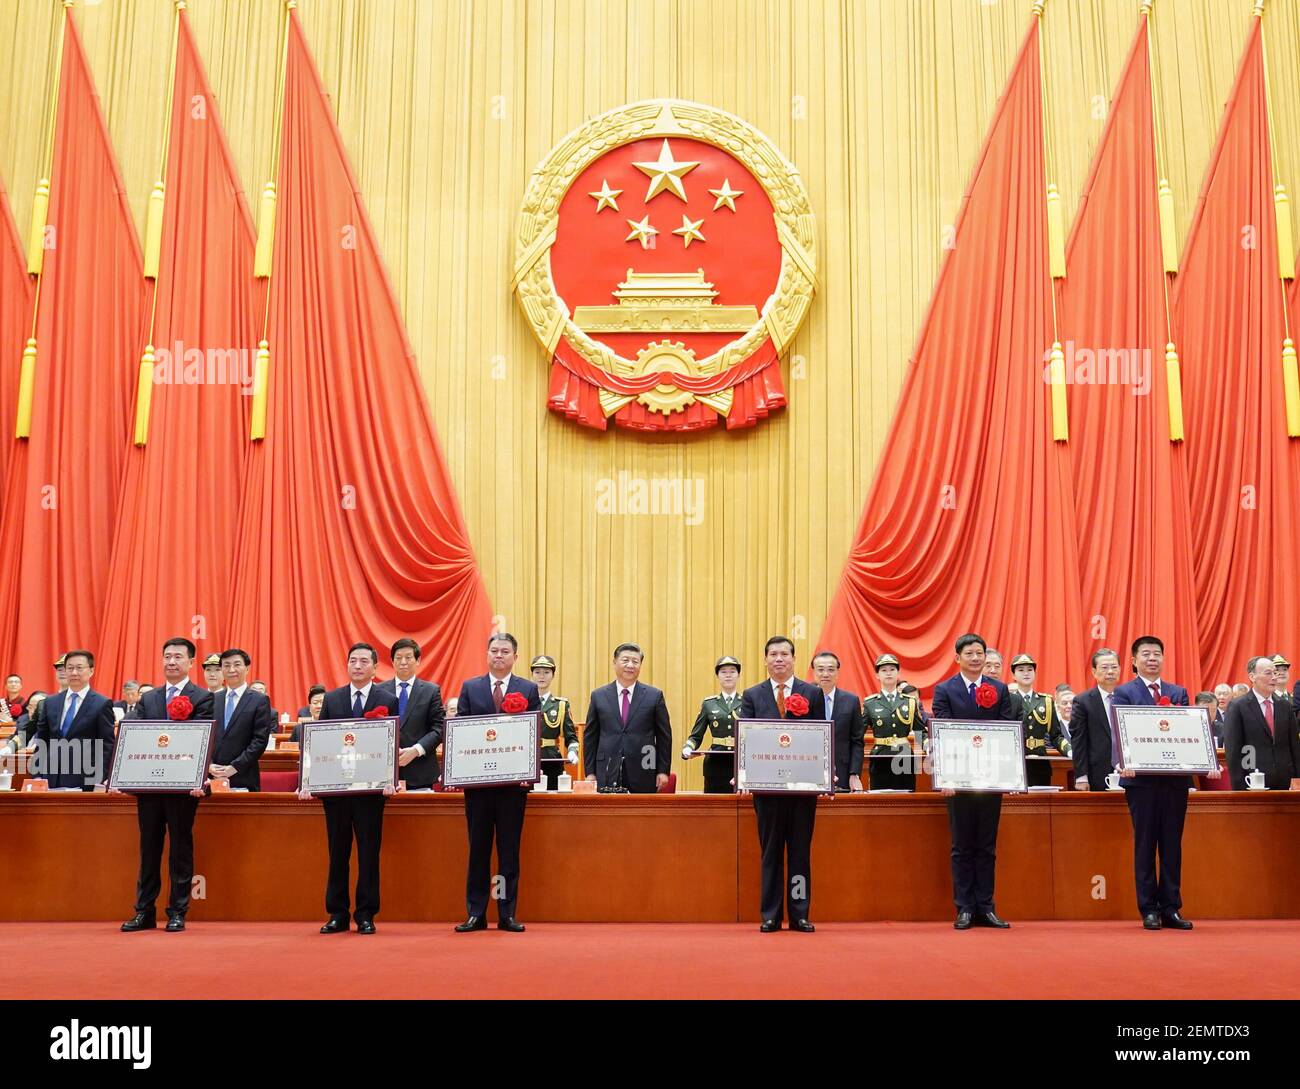 Beijing, China. 25th Feb, 2021. Chinese President Xi Jinping, also general secretary of the Communist Party of China Central Committee and chairman of the Central Military Commission, presents awards to individuals and groups for their outstanding achievements in the fight against penury during a grand gathering to mark the nation's poverty alleviation accomplishments and honor model poverty fighters at the Great Hall of the People in Beijing, capital of China, Feb. 25, 2021. Credit: Yan Yan/Xinhua/Alamy Live News Stock Photo